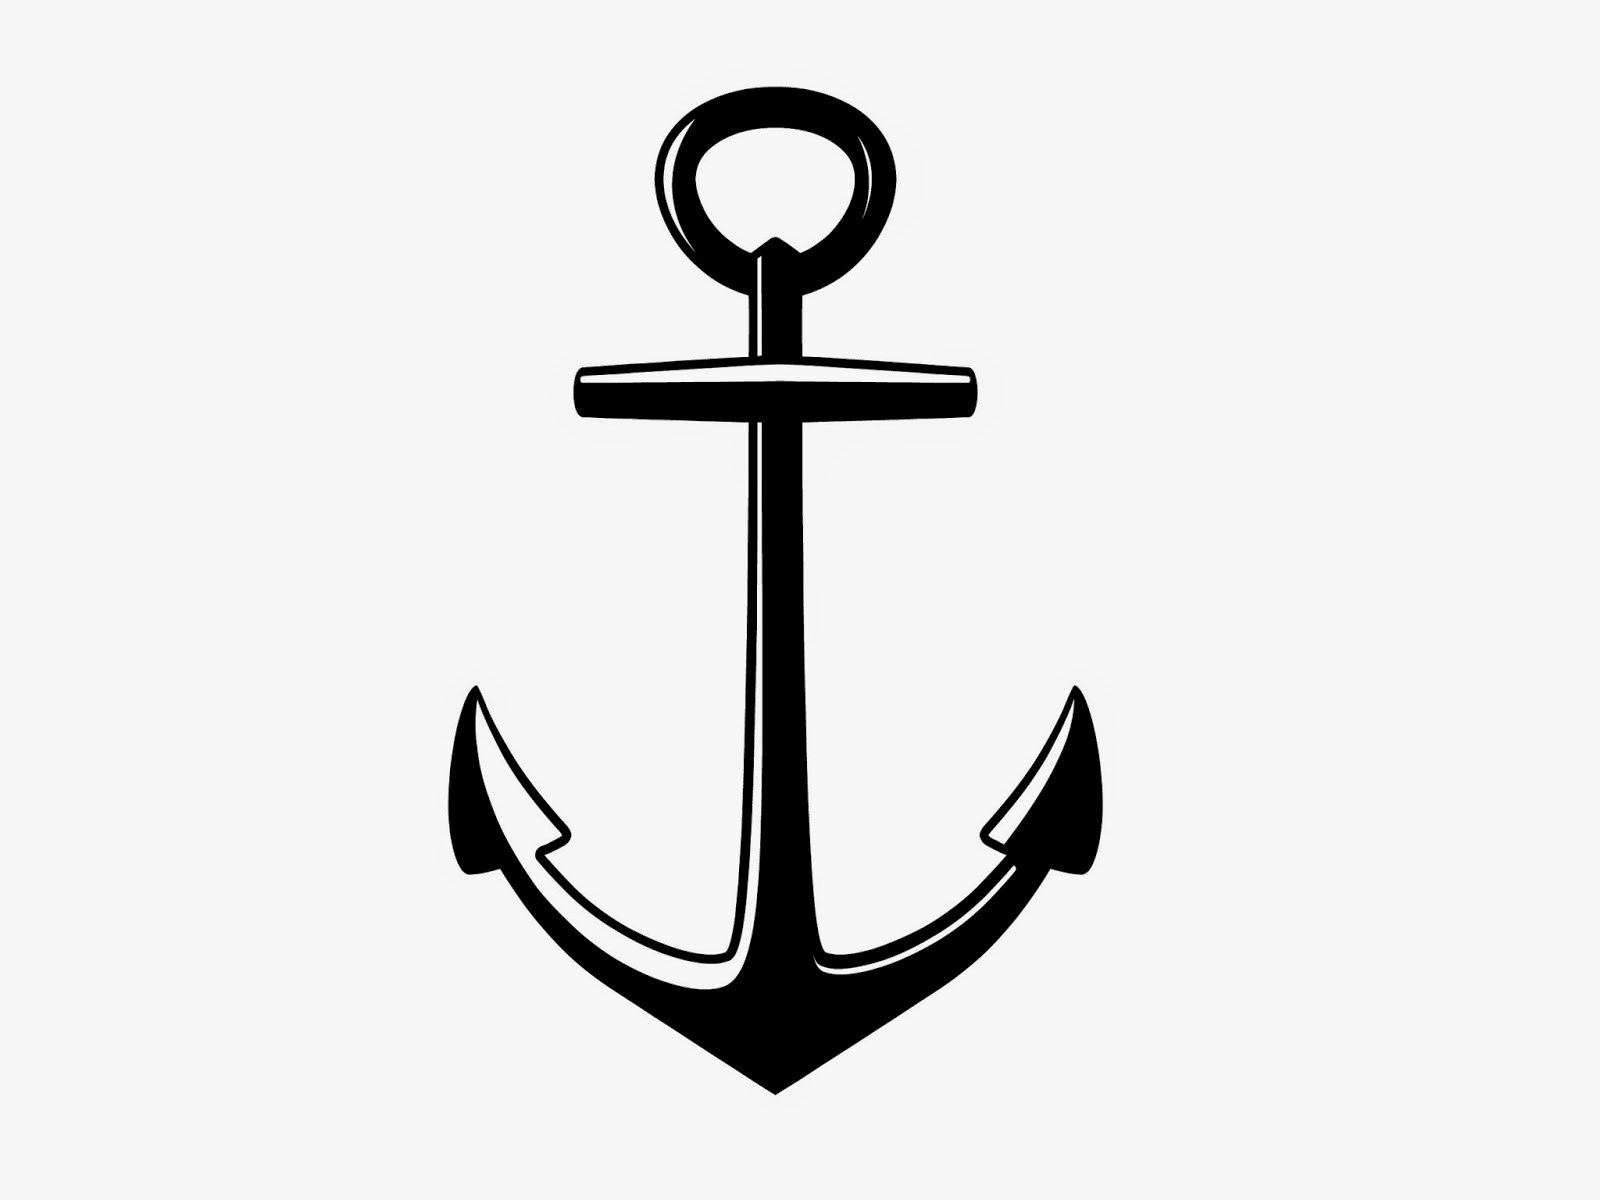 6 Best Images of Free Anchor Stencil Printable - Anchor Cross ...